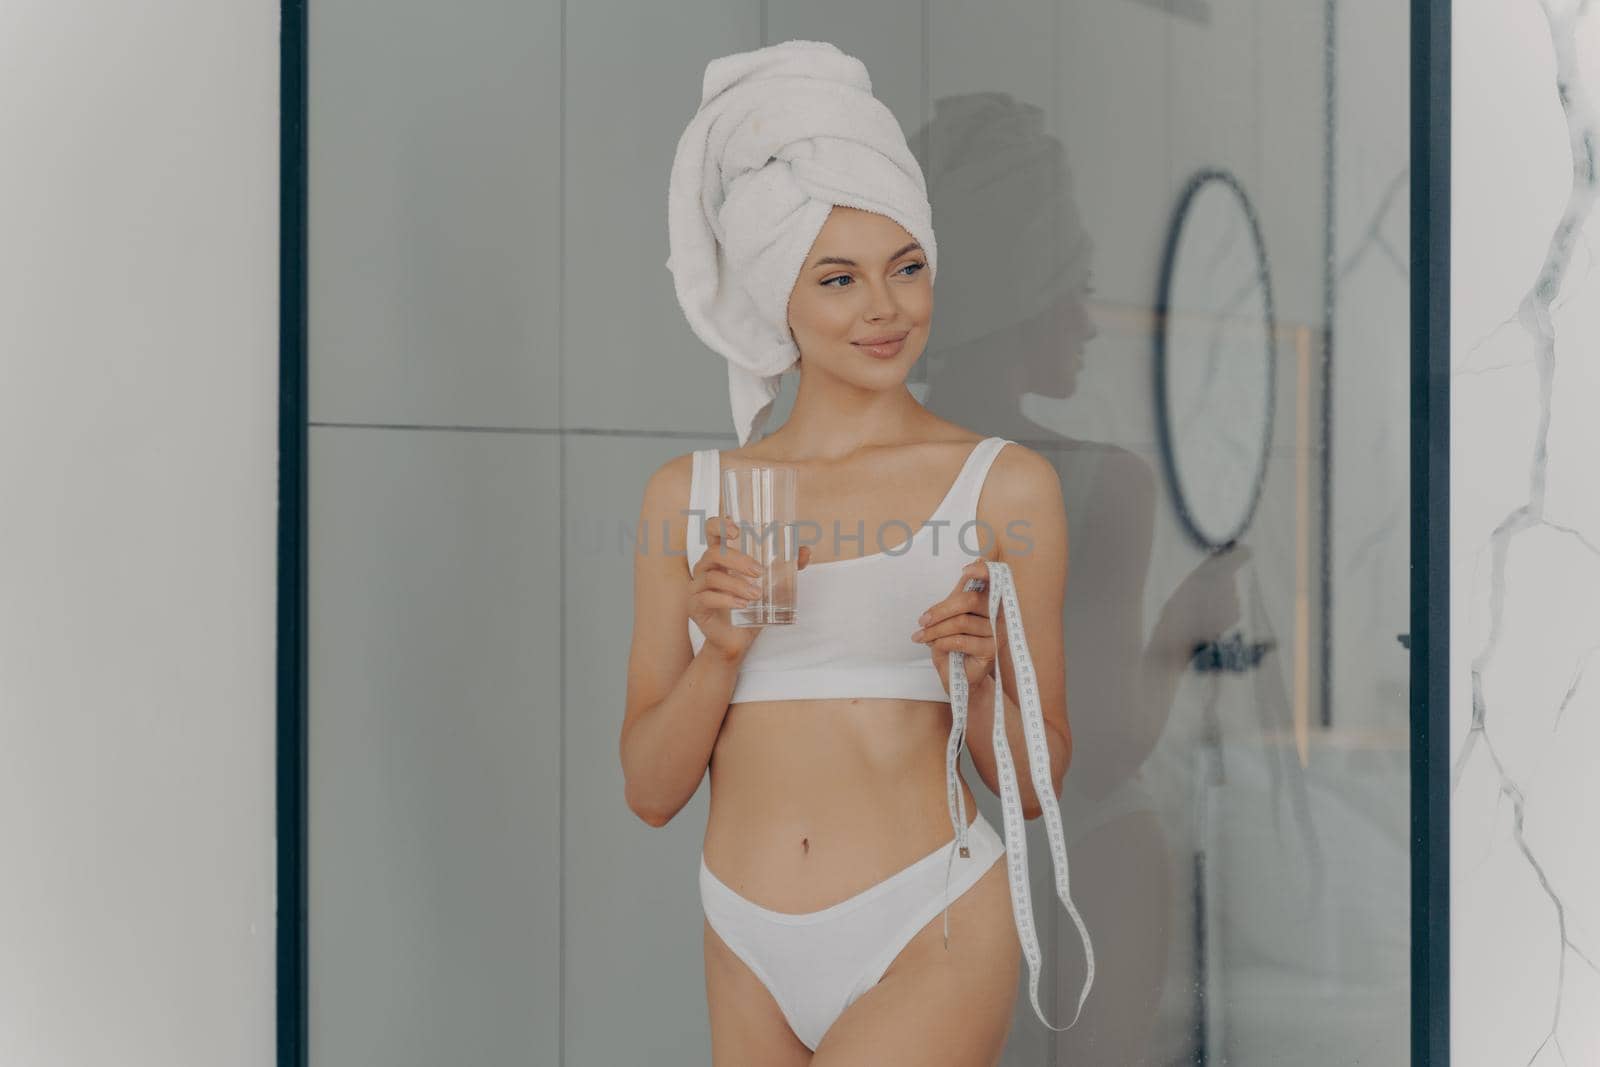 Healthy lifestyle. Fit beautiful young girl posing in underwear in bathroom after taking shower with glass of fresh water and measuring tape, happy to start early morning routine